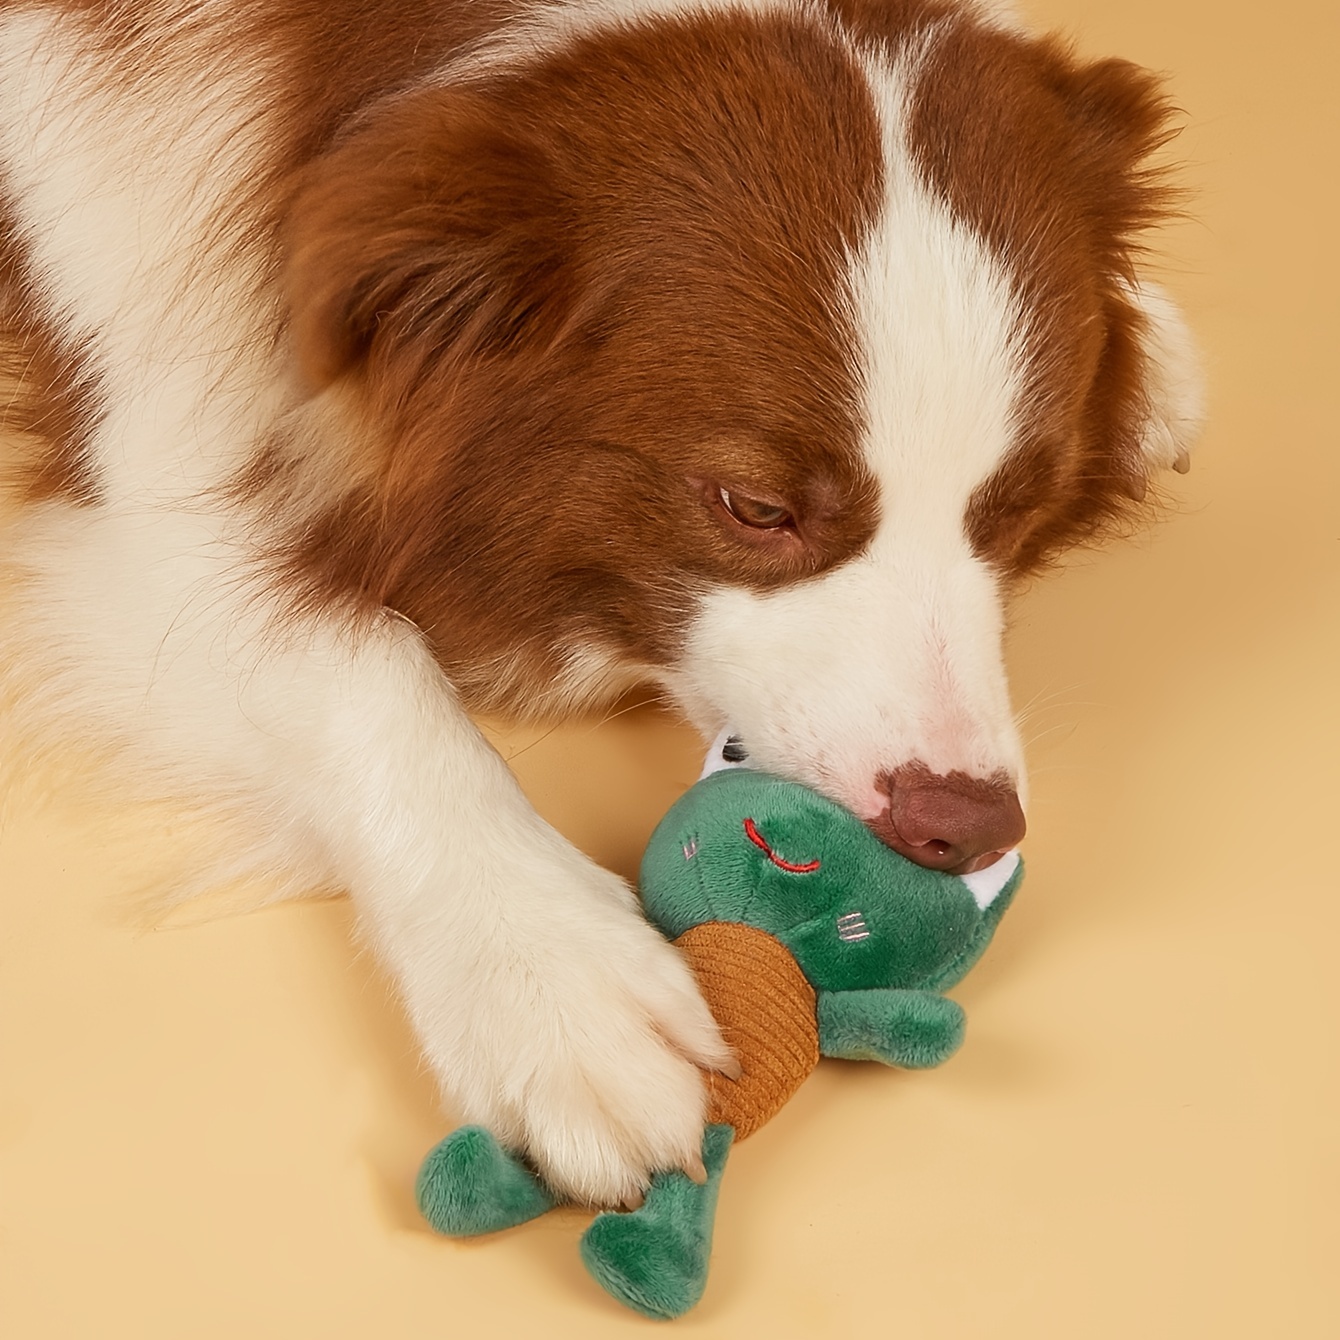 Chewable Frog Plush Toy for Small and Medium Dogs - Provides Hours of Fun  and Entertainment